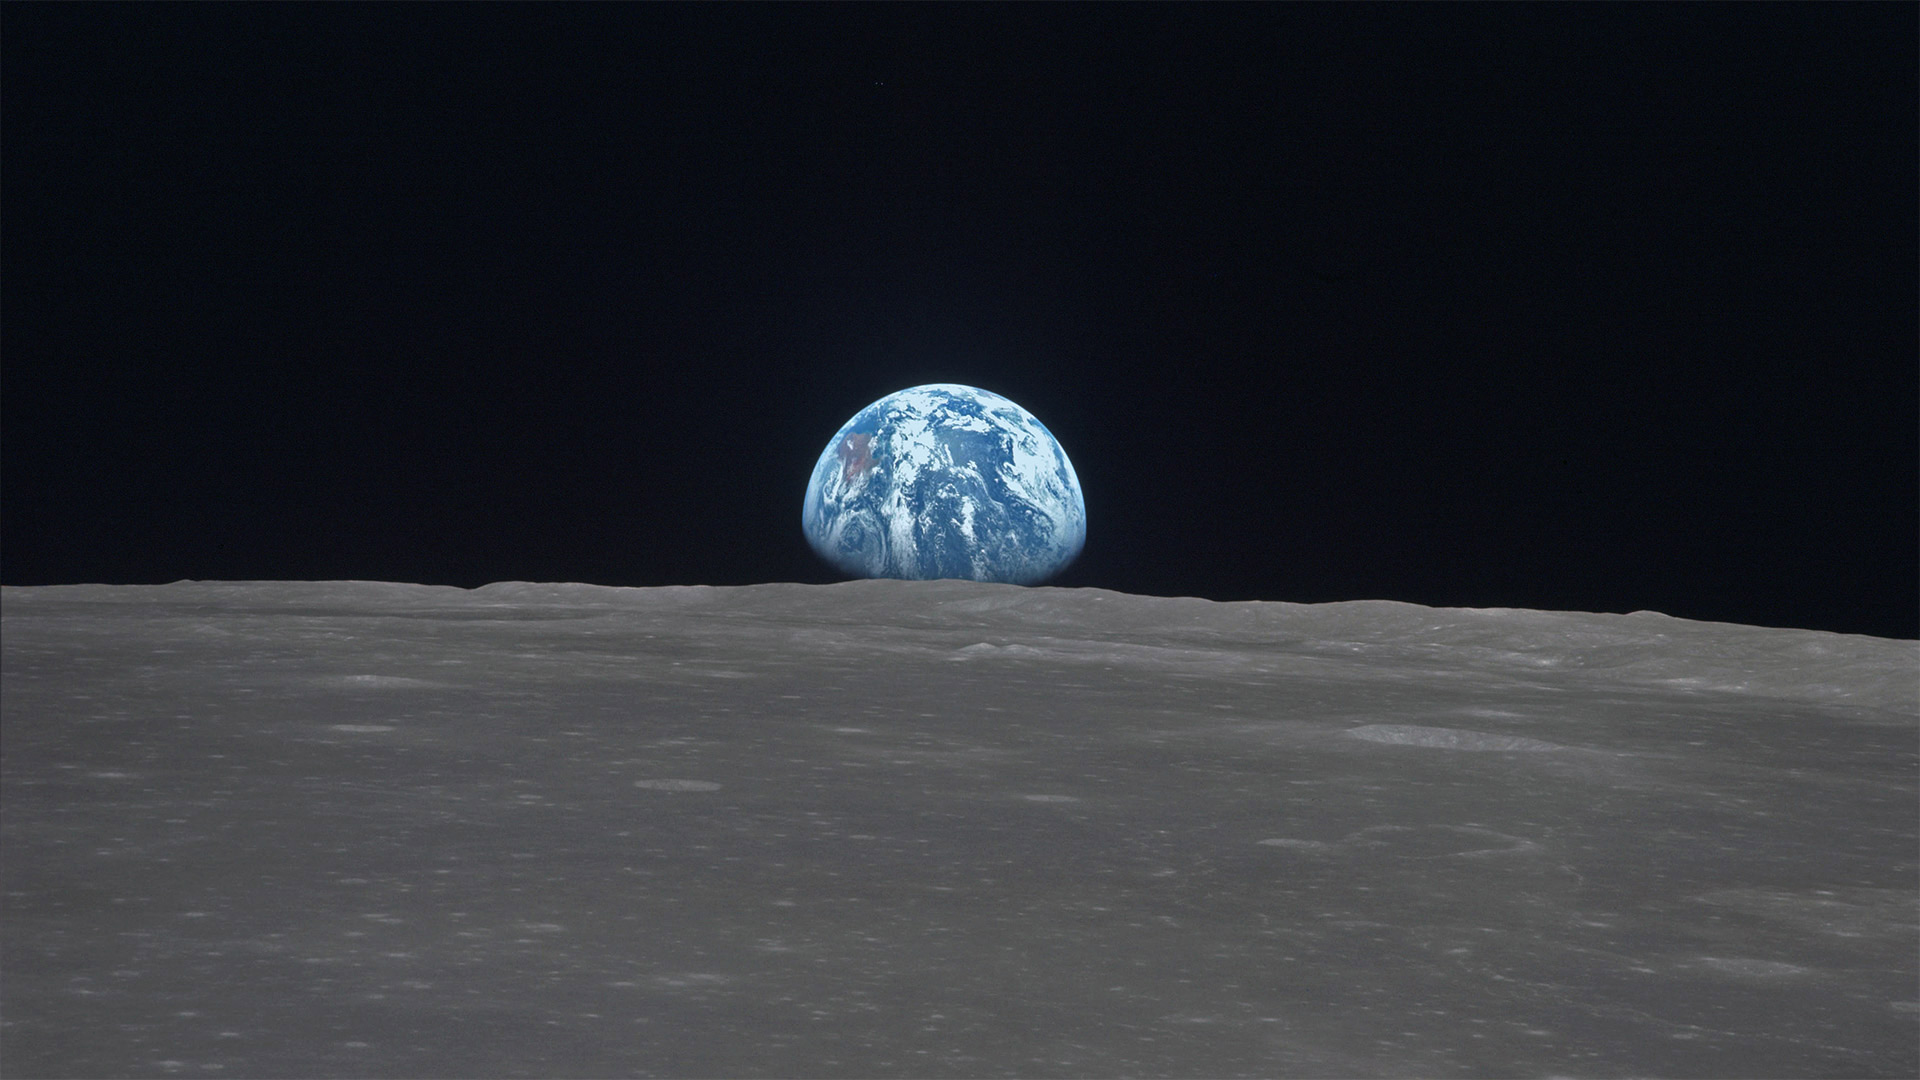 Earthrise across Mare Smythii on the moon - Image Science and Analysis Laboratory, NASA-Johnson Space Center)